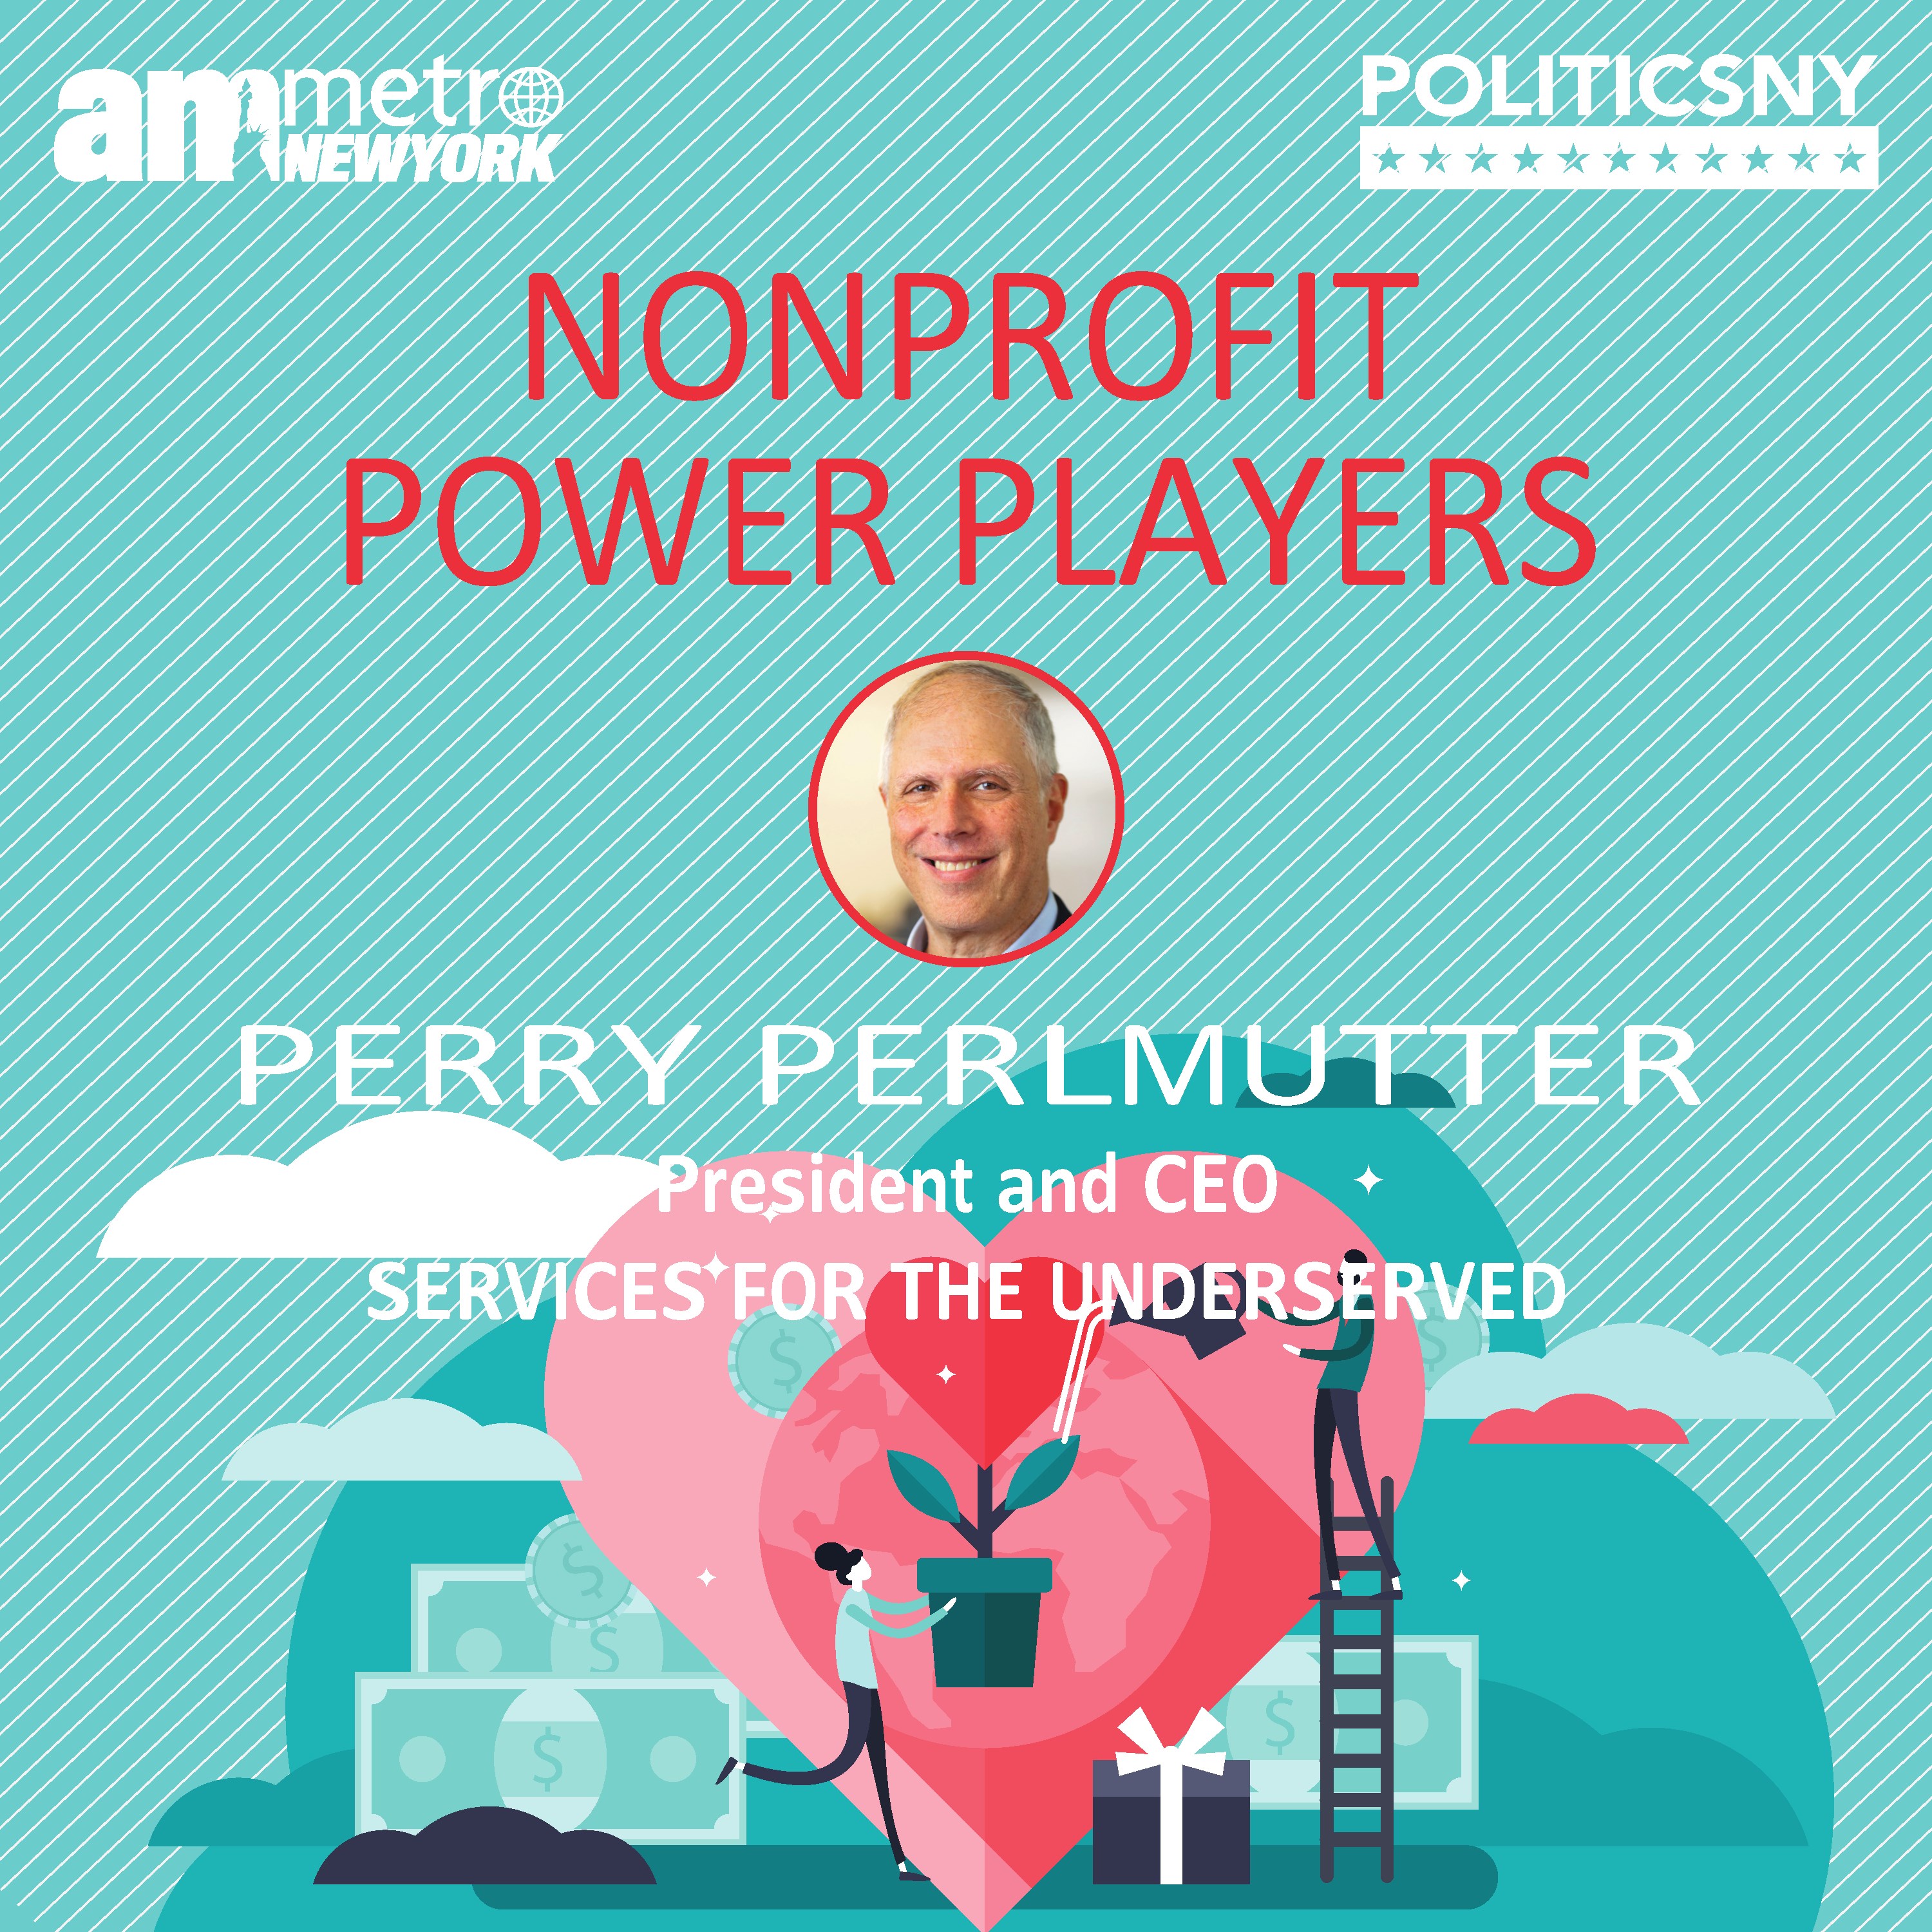 Perry Perlmutter named as Nonprofit Power Player